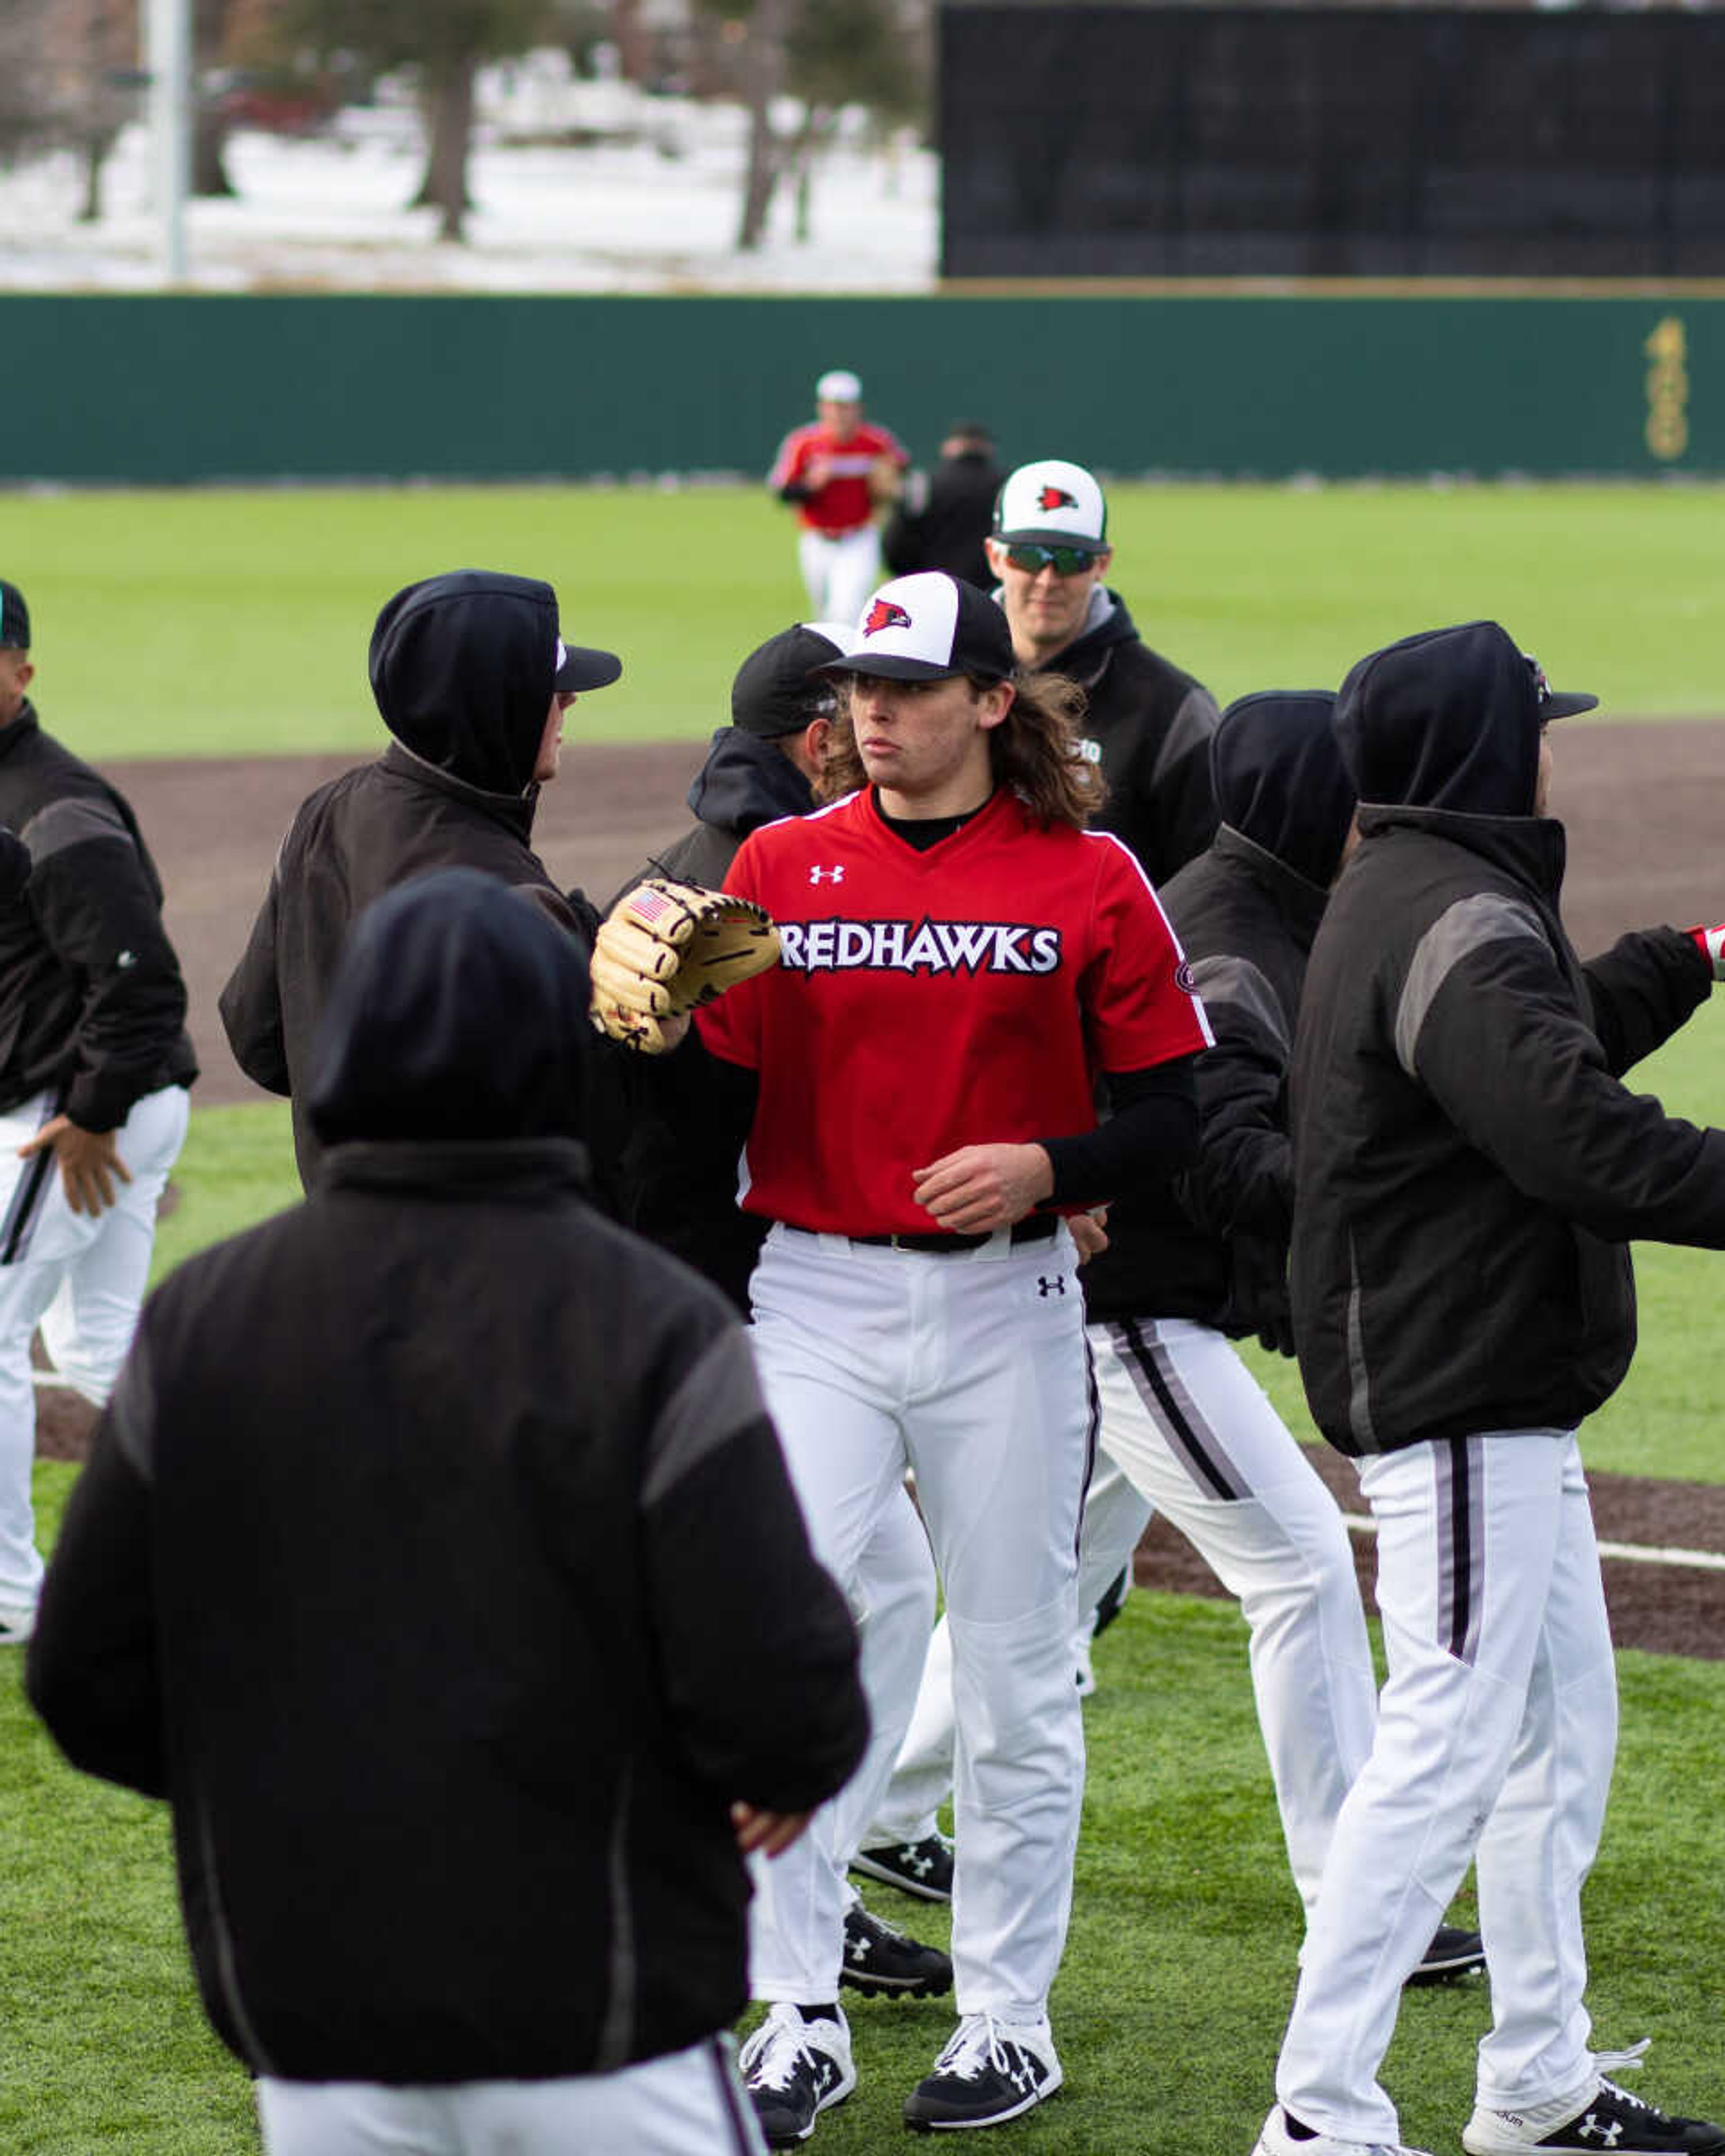 Junior utility player Dylan Dodd walks through a group of teammates before taking the mound on Feb. 15.